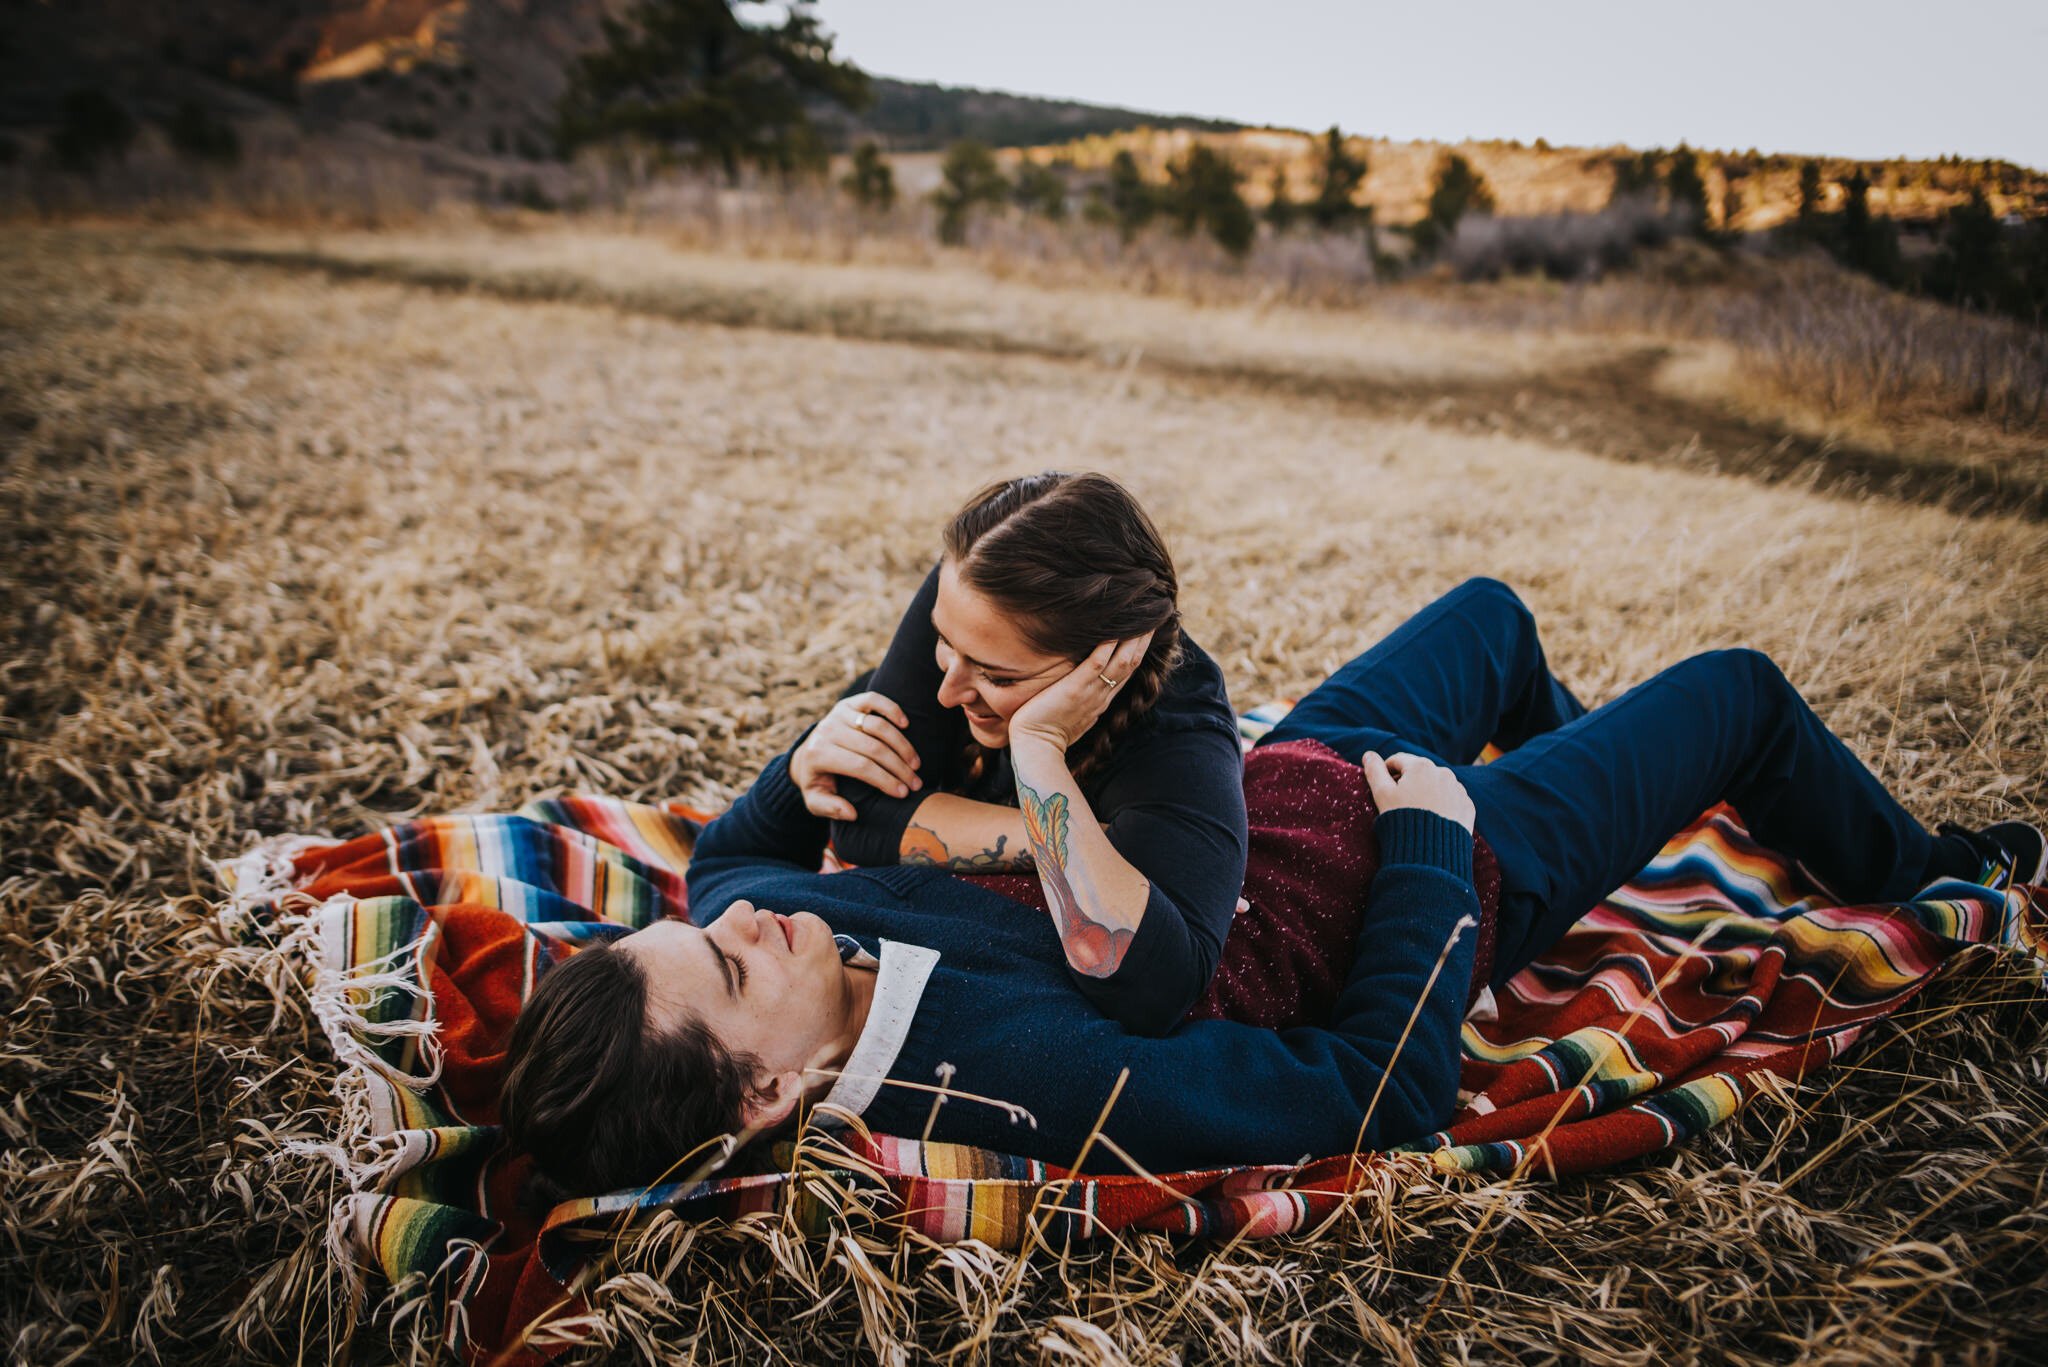 Yulia+and+Logan+Couples+Session+Colorado+Springs+Colorado+Sunset+Cheyenne+Canyon+Husband+Wife+Wild+Prairie+Photography-13-2020.jpeg